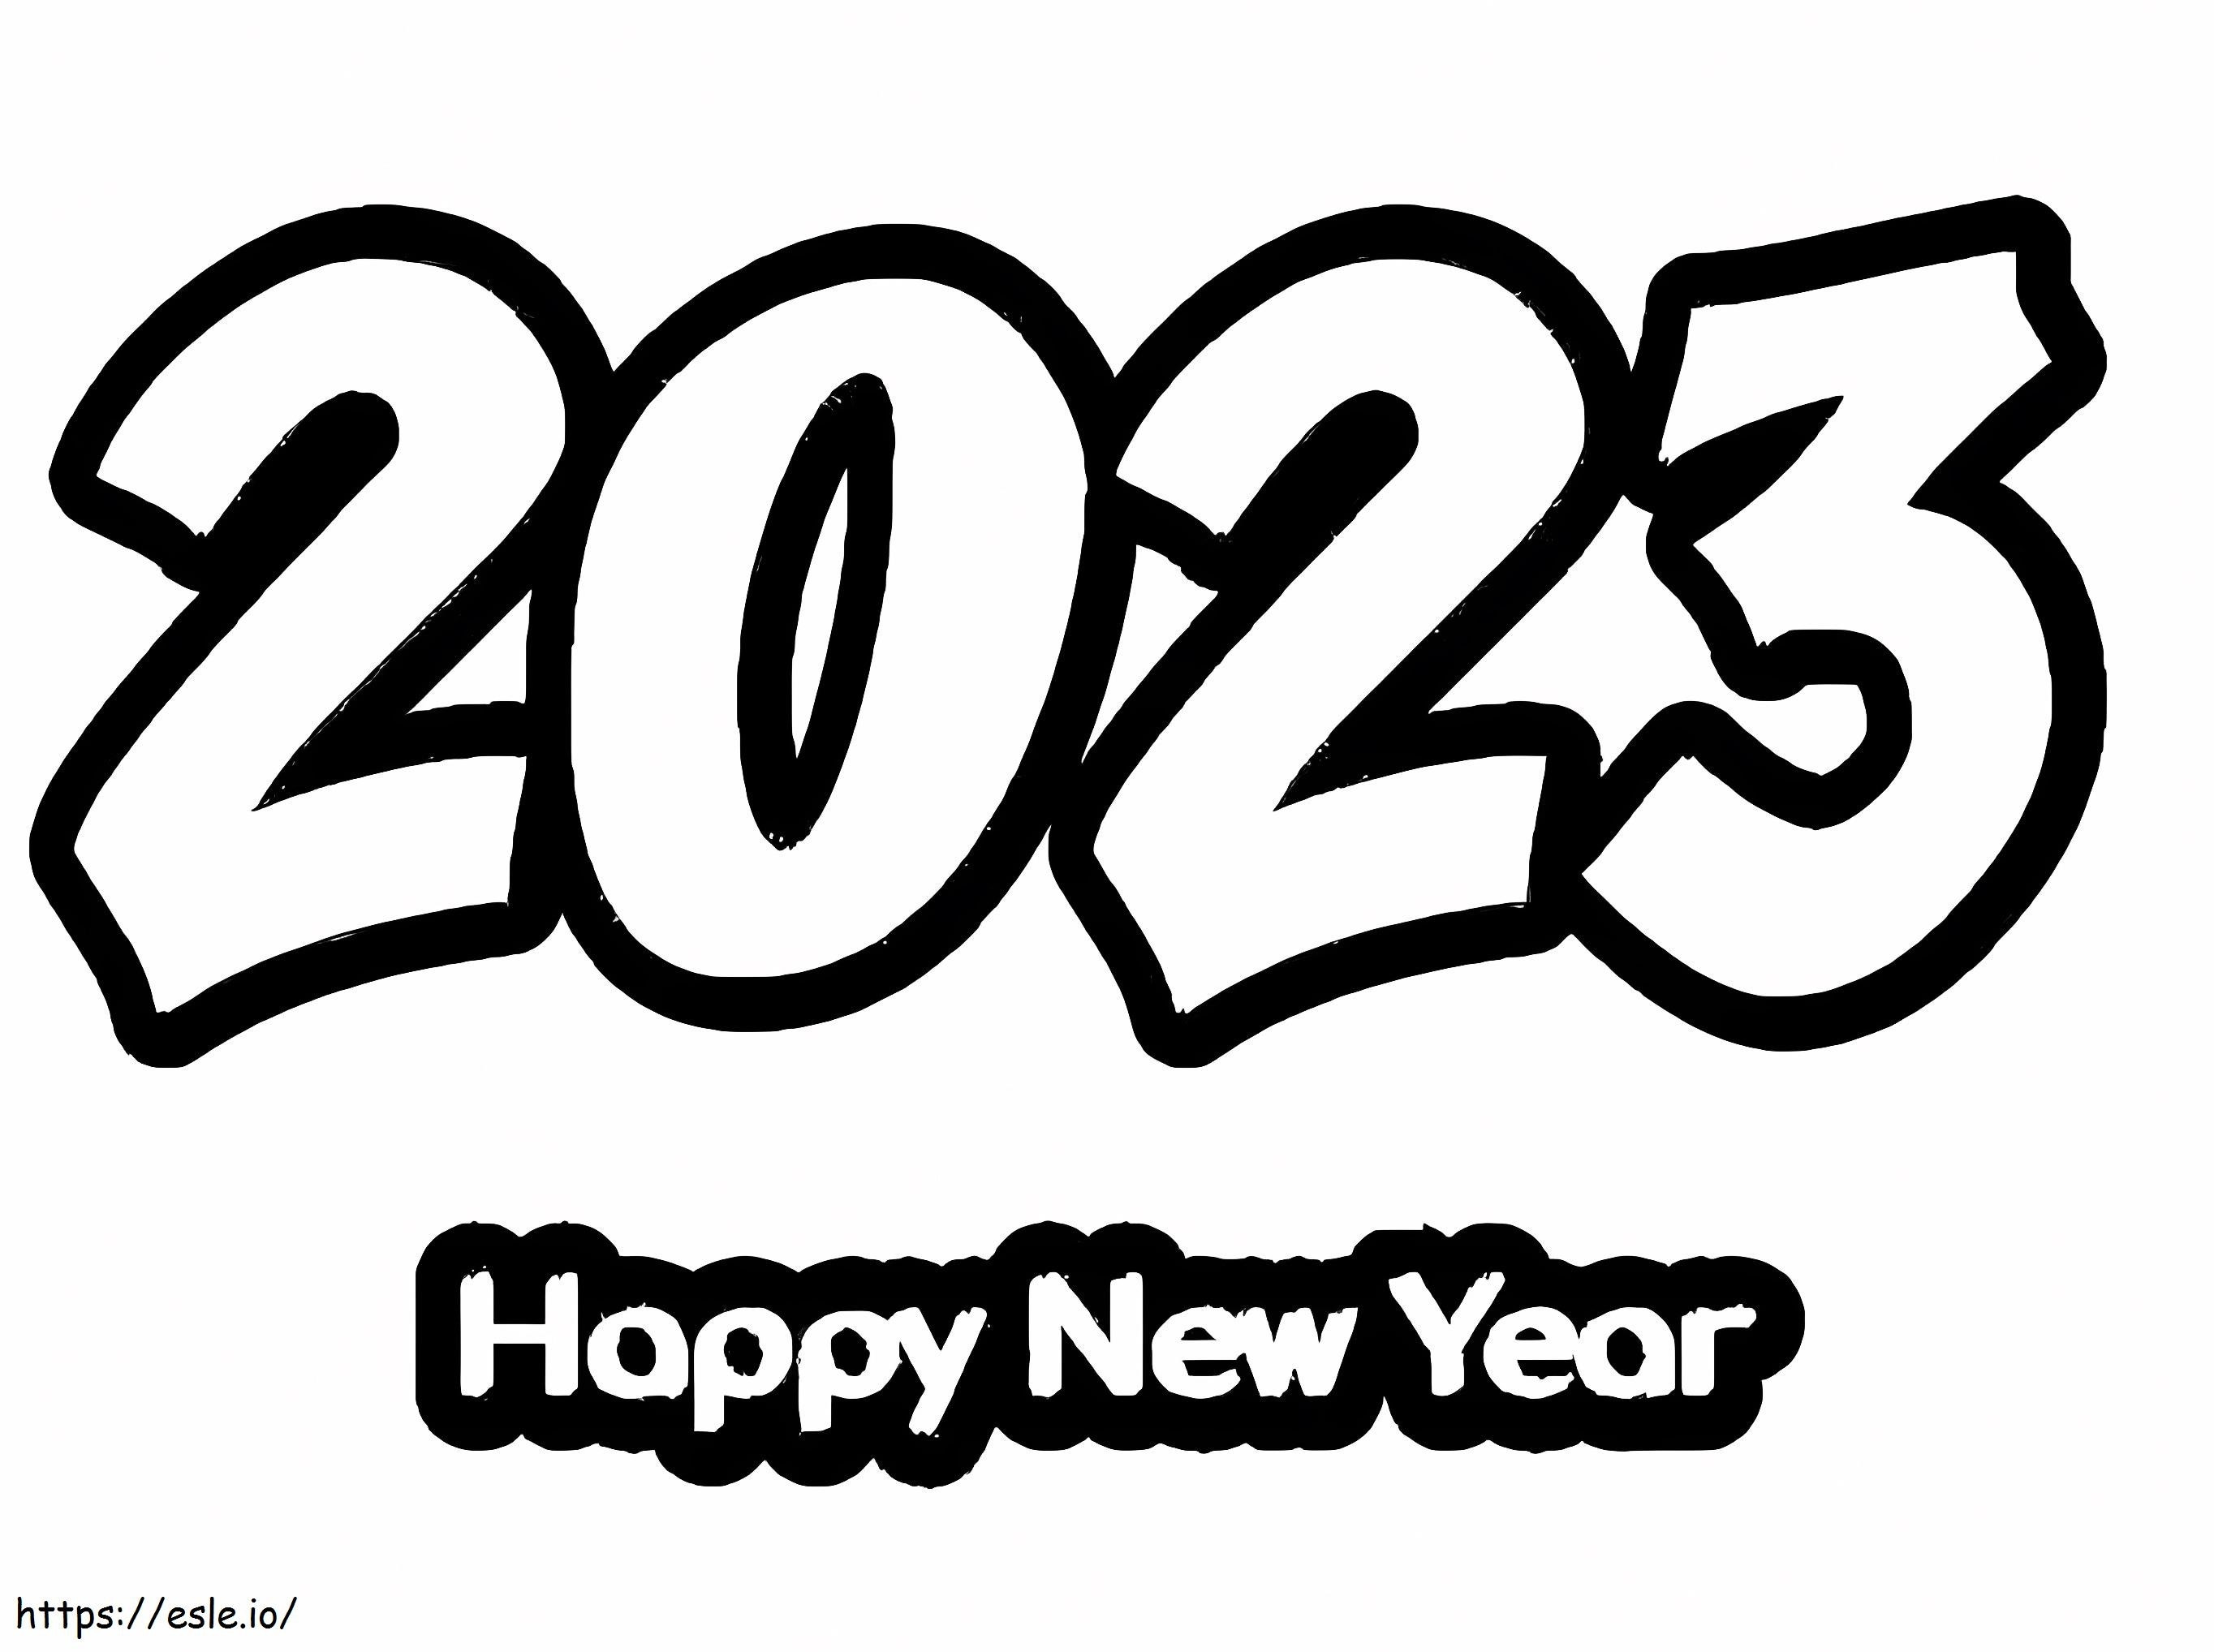 2023 Happy New Year coloring page